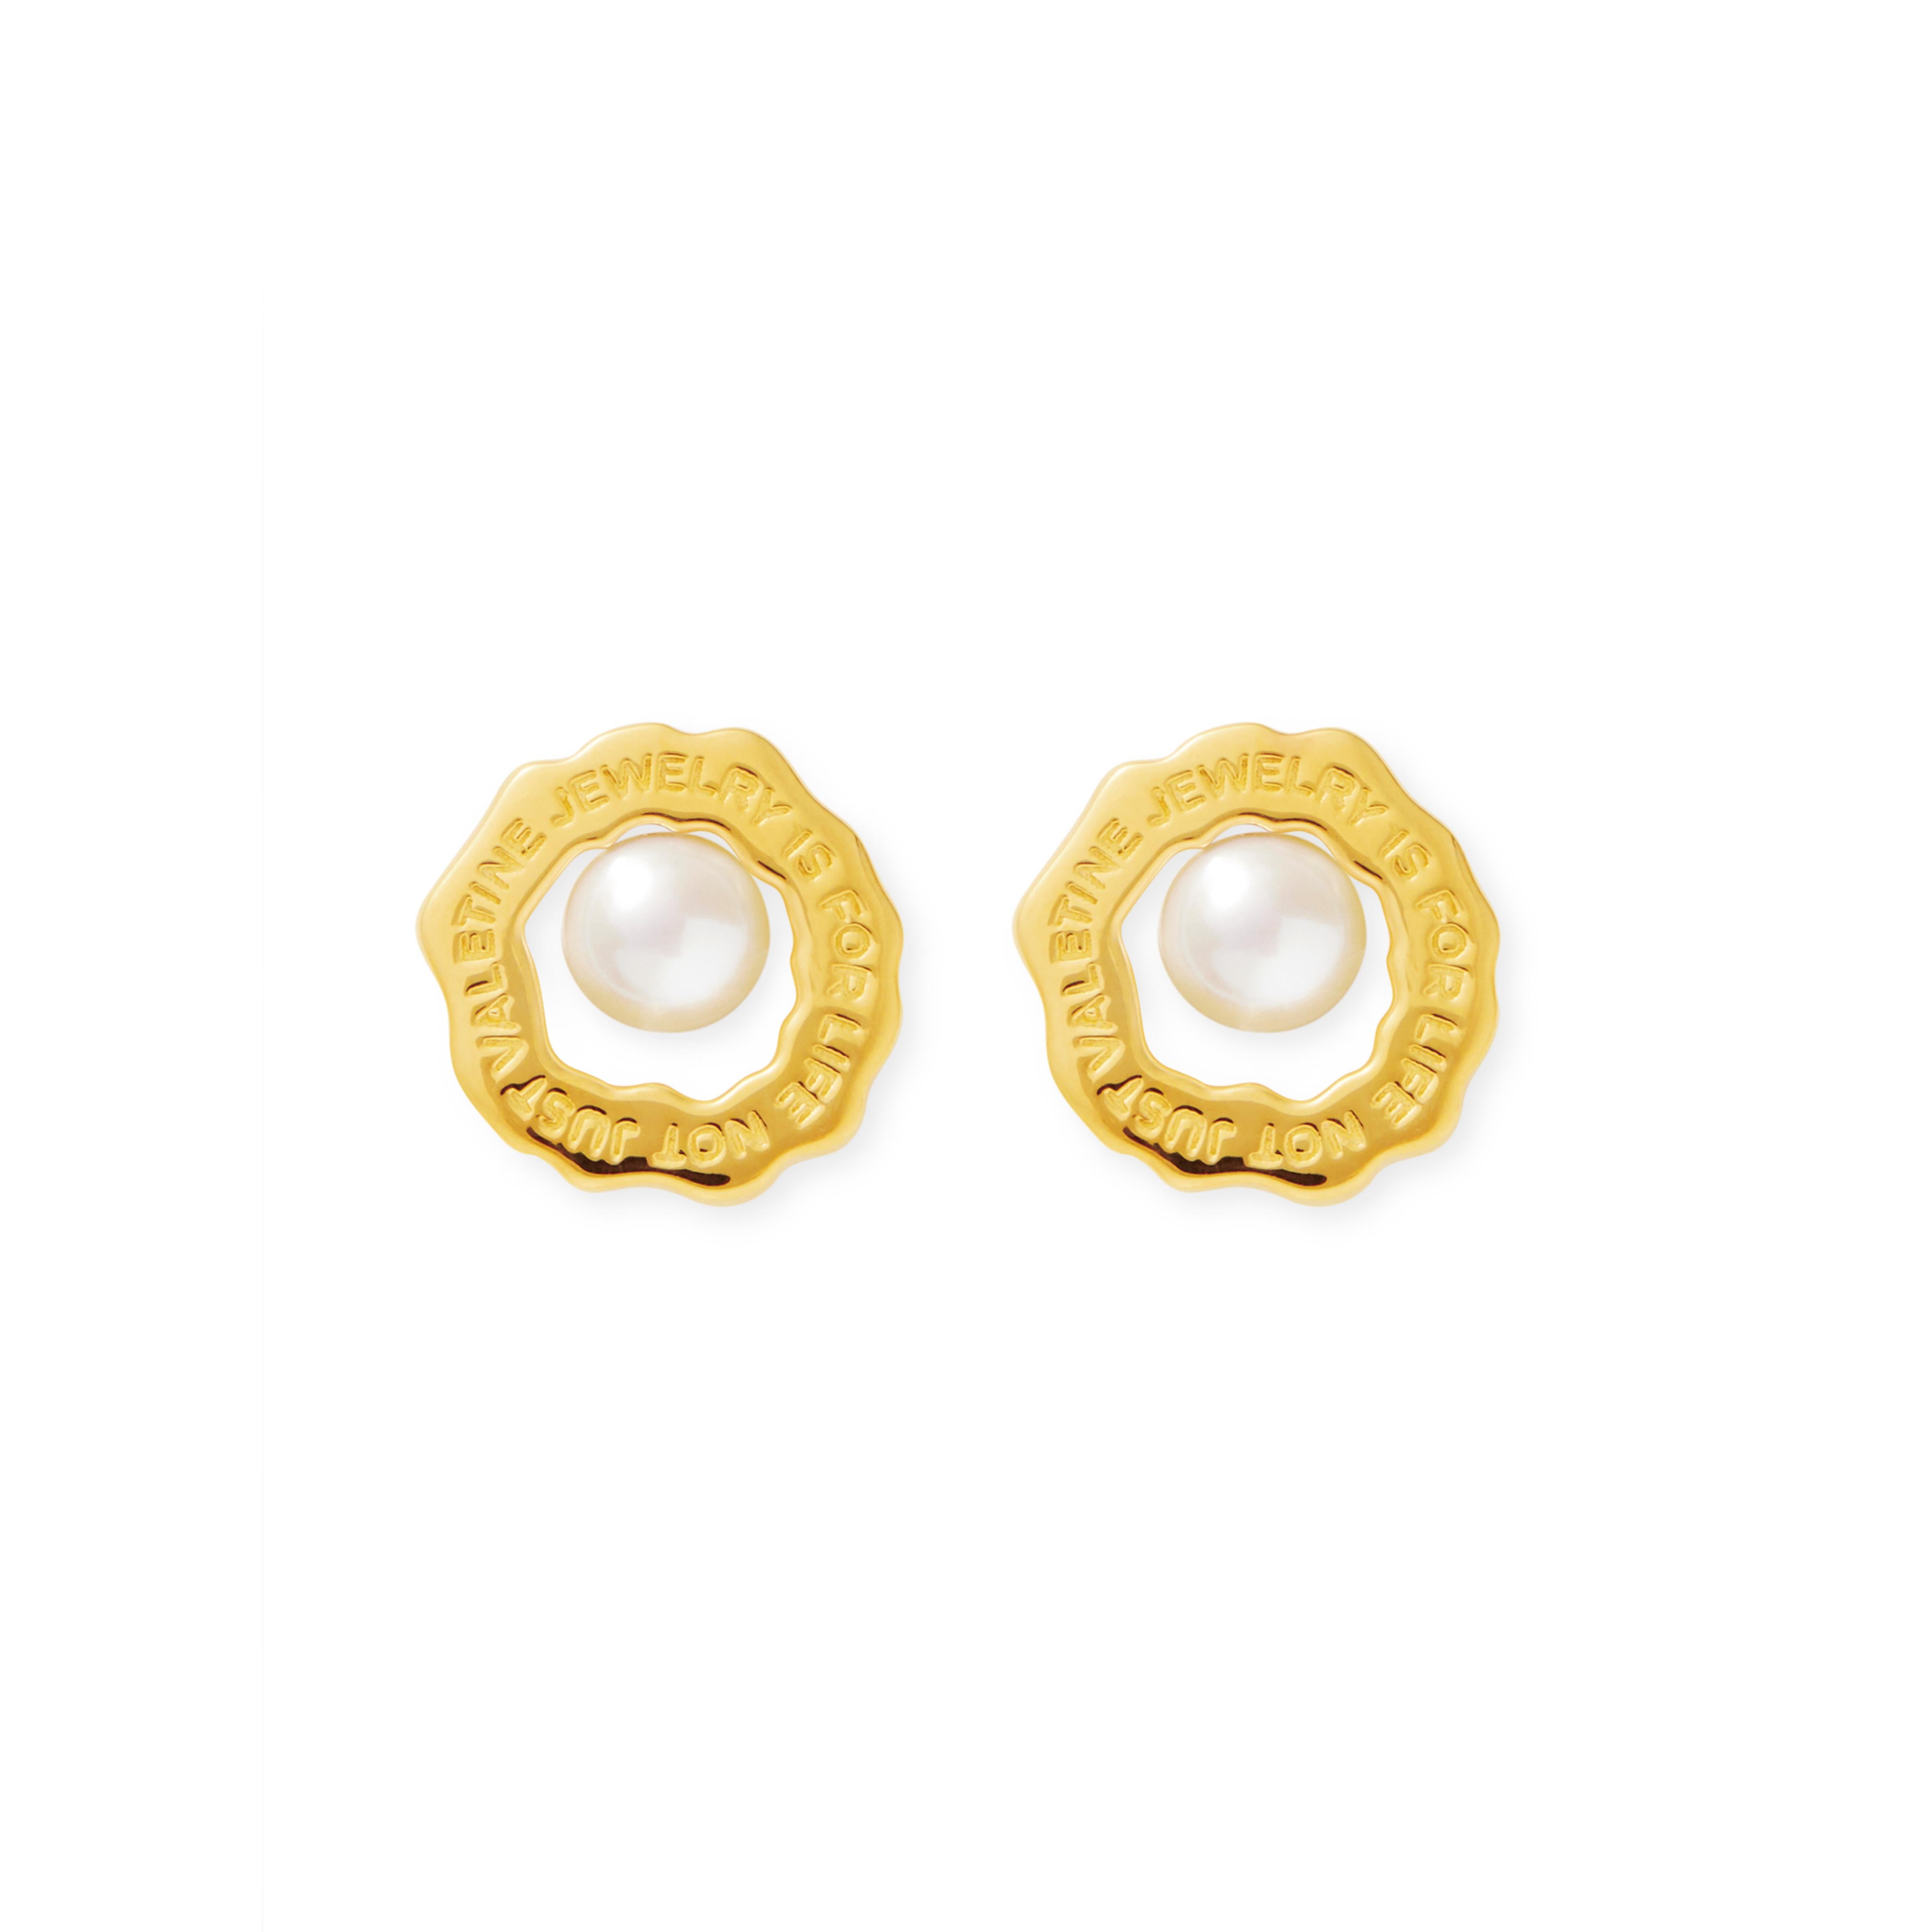 Organic shaped pearl earrings made from 18K gold. These earrings are easy to wear comfortable and a striking addition to ones jewelry collection. Engraved with 'Jewelry is for life not just Valentine'

